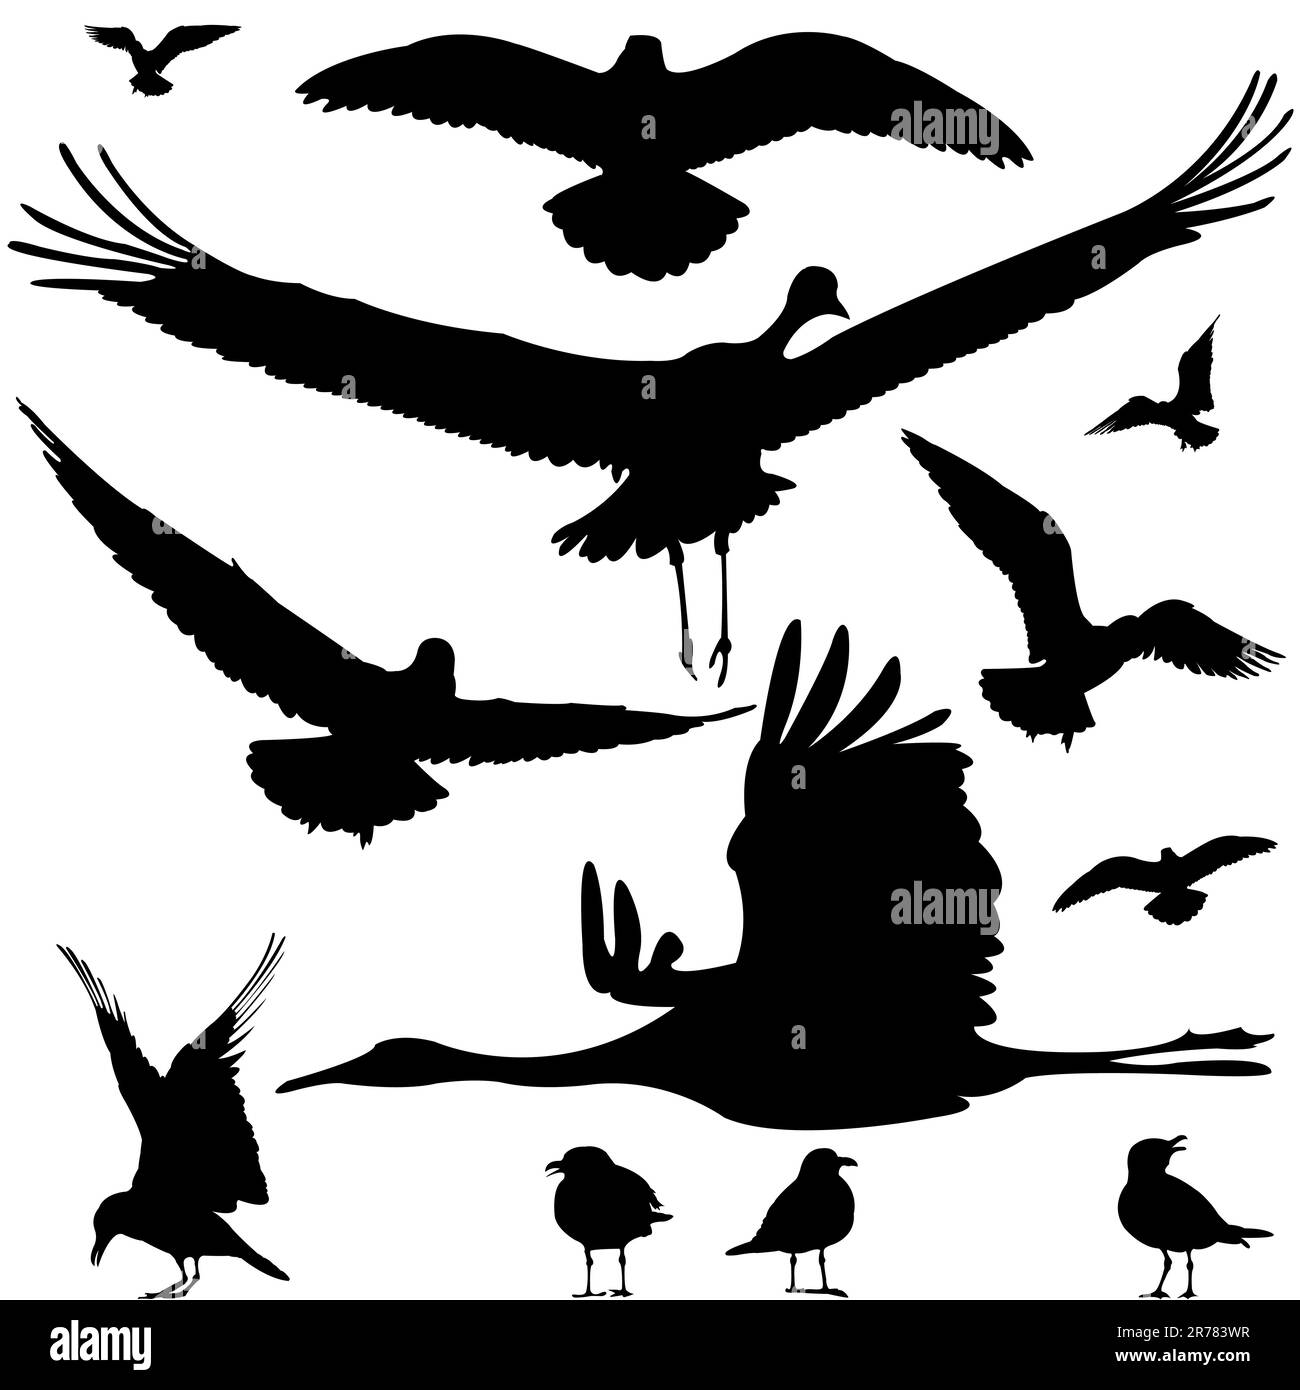 birds silhouettes isolated on white, abstract art illustration Stock Vector